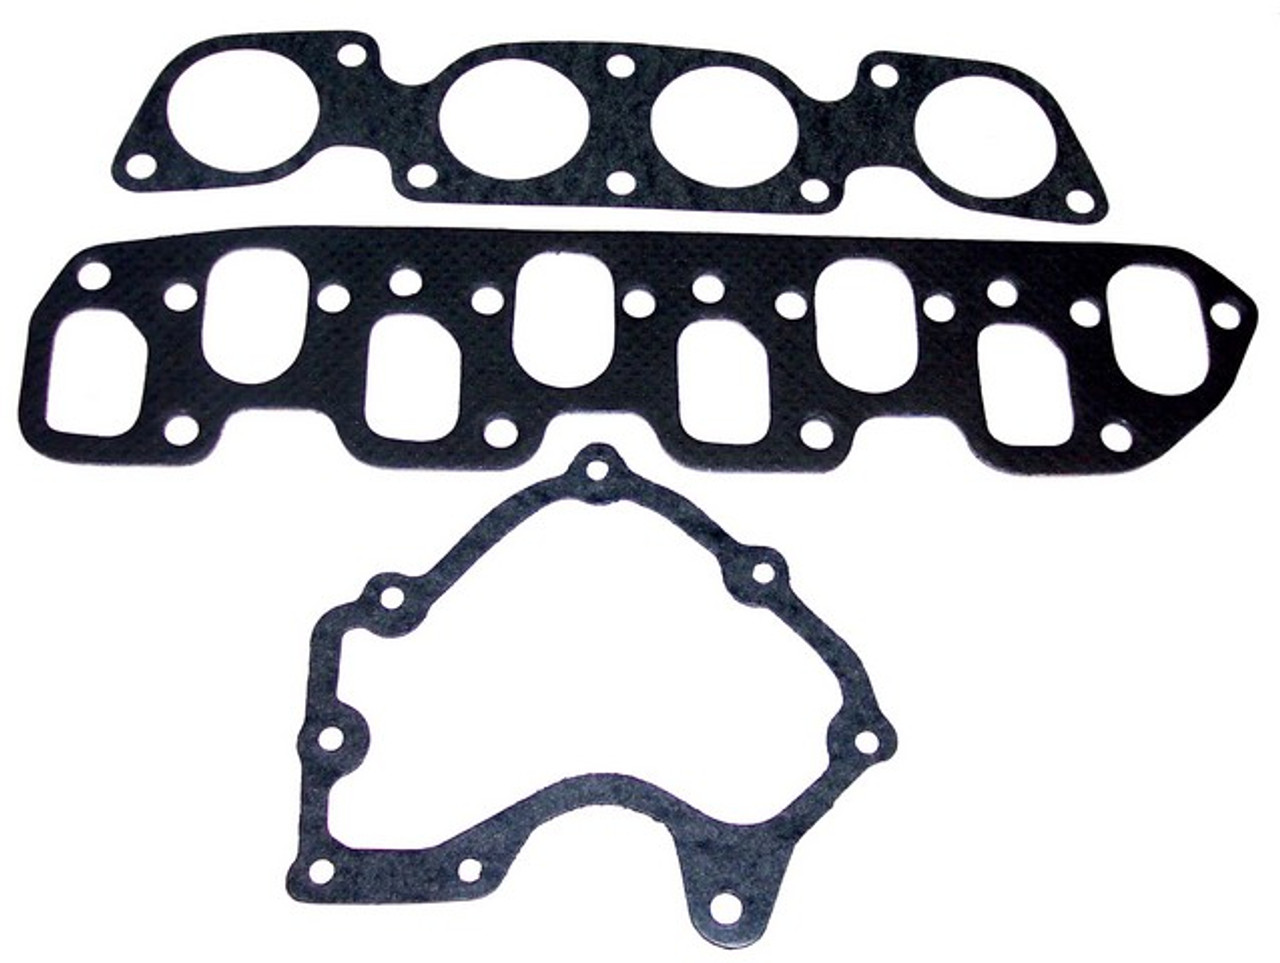 Plenum Gasket 2.5L 1988 Plymouth Caravelle - MG145.141